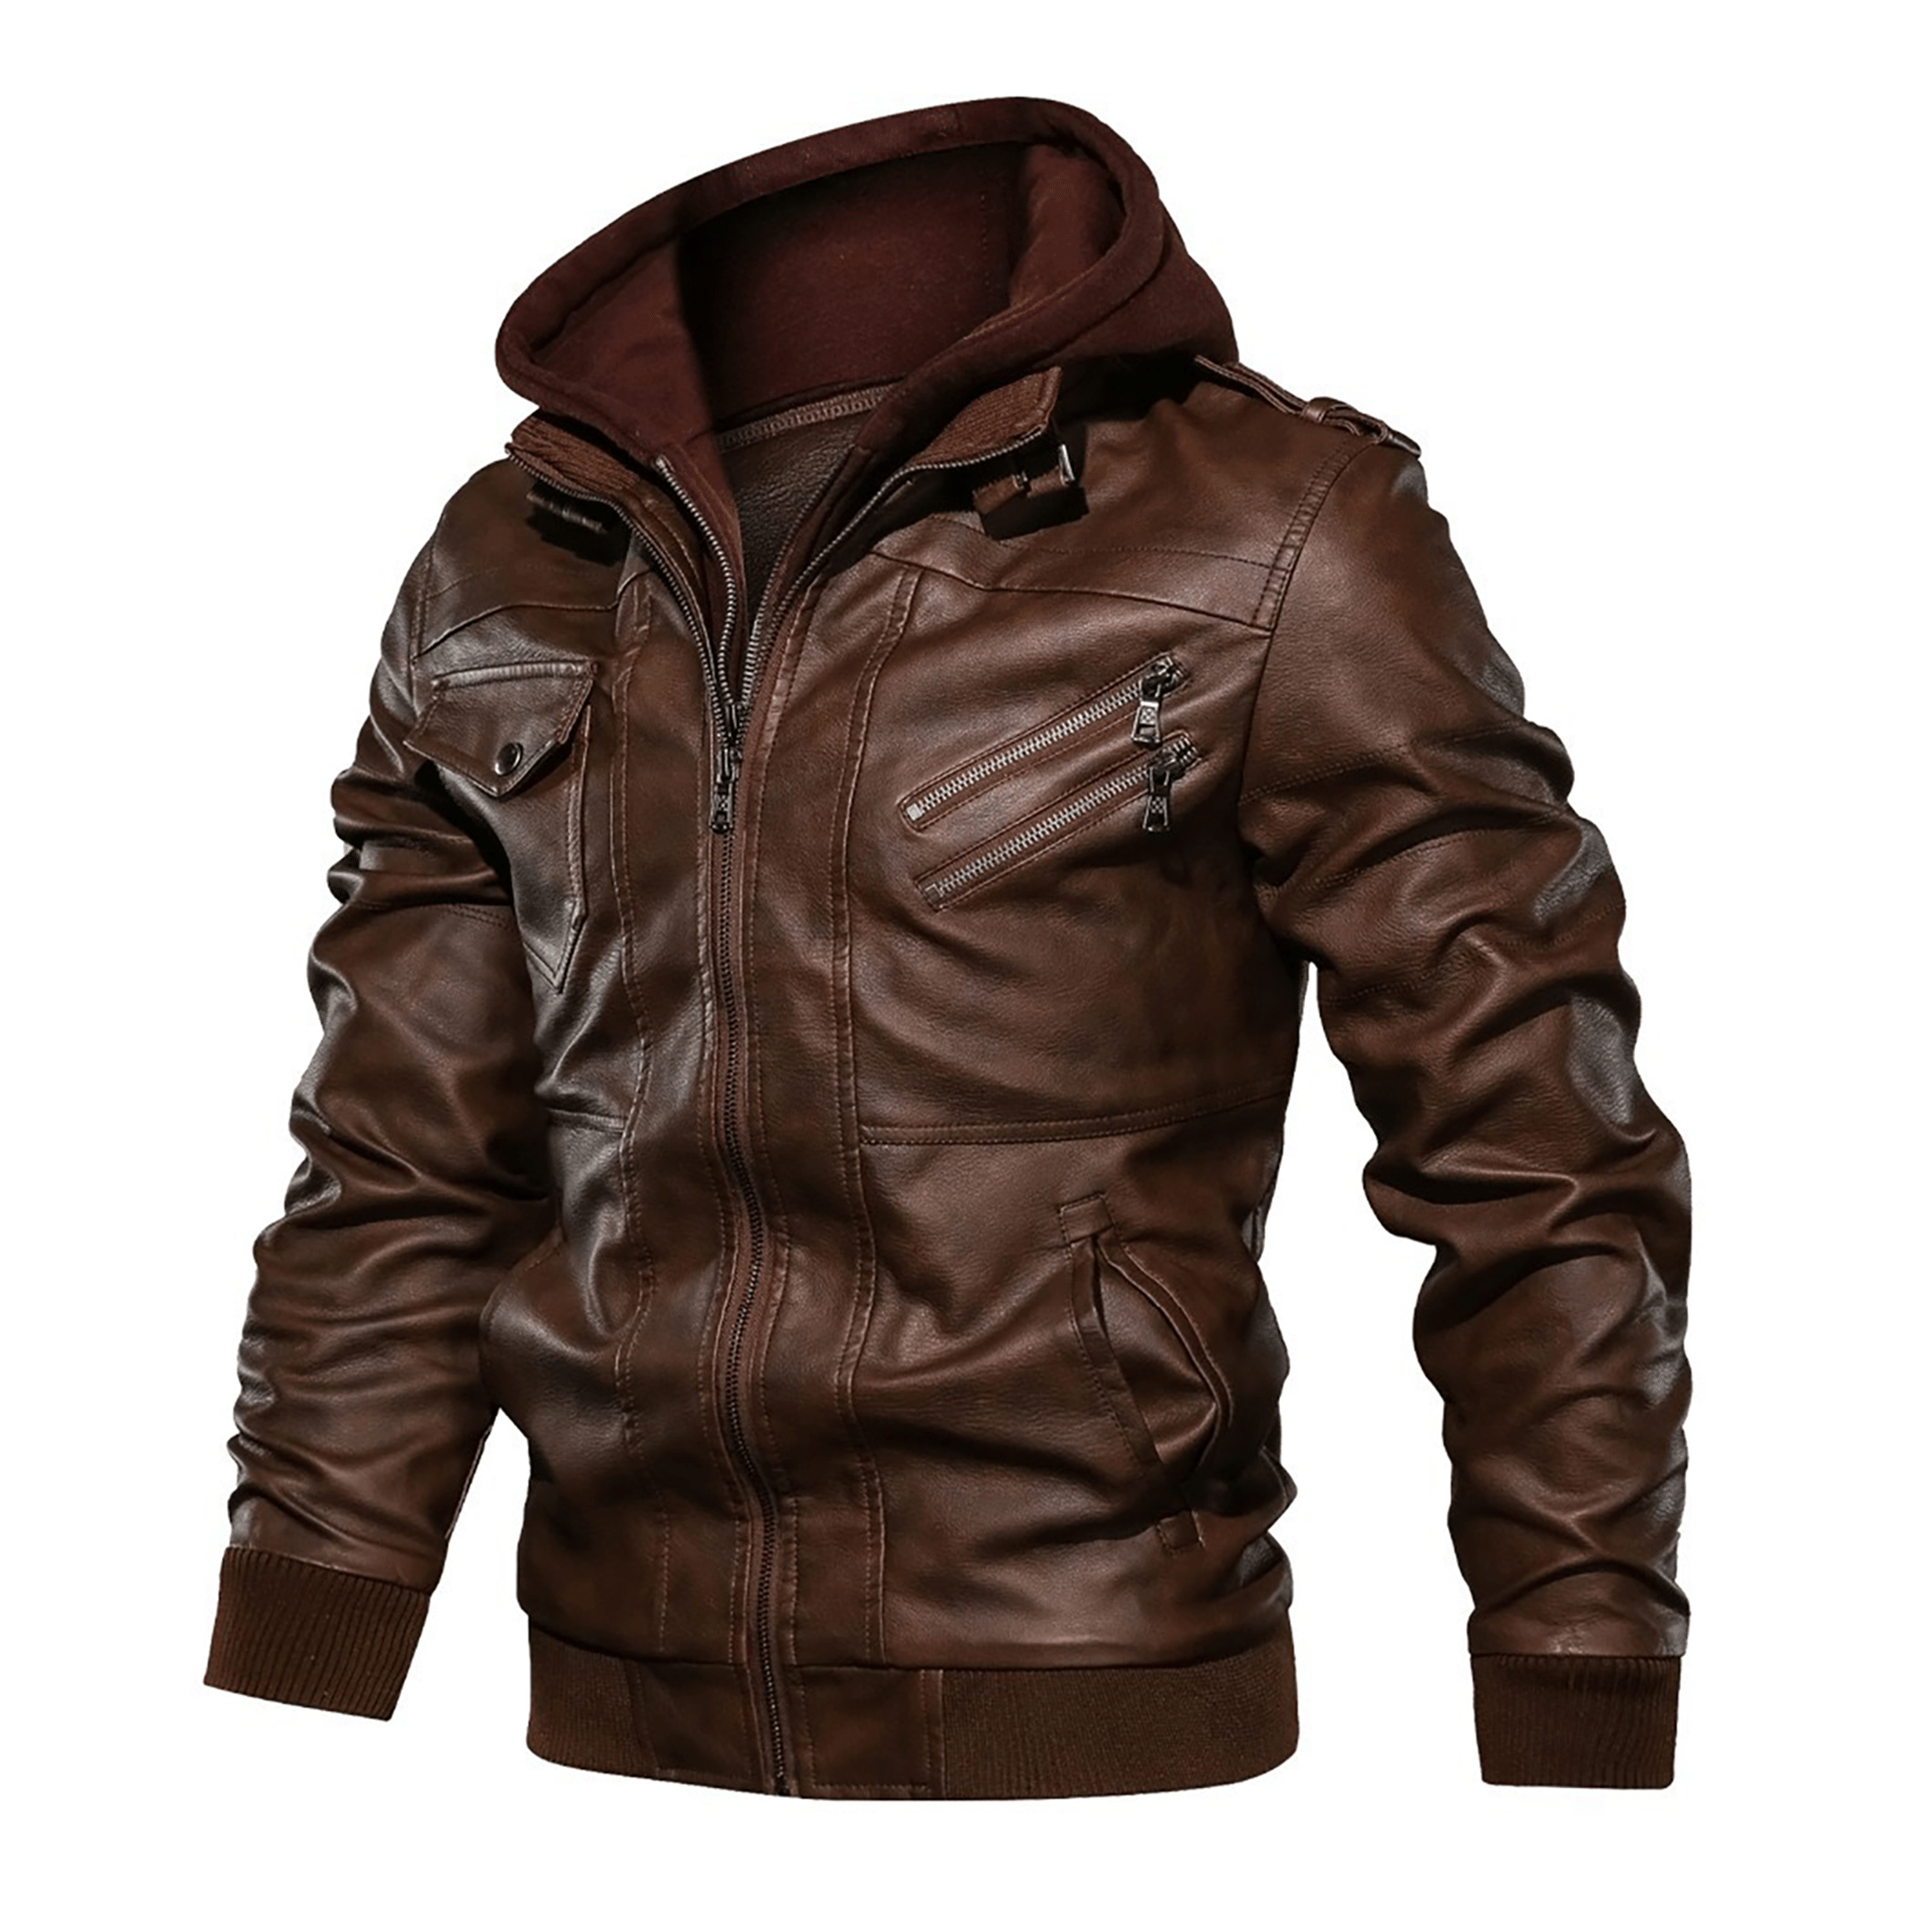 Top leather jackets and latest products 269